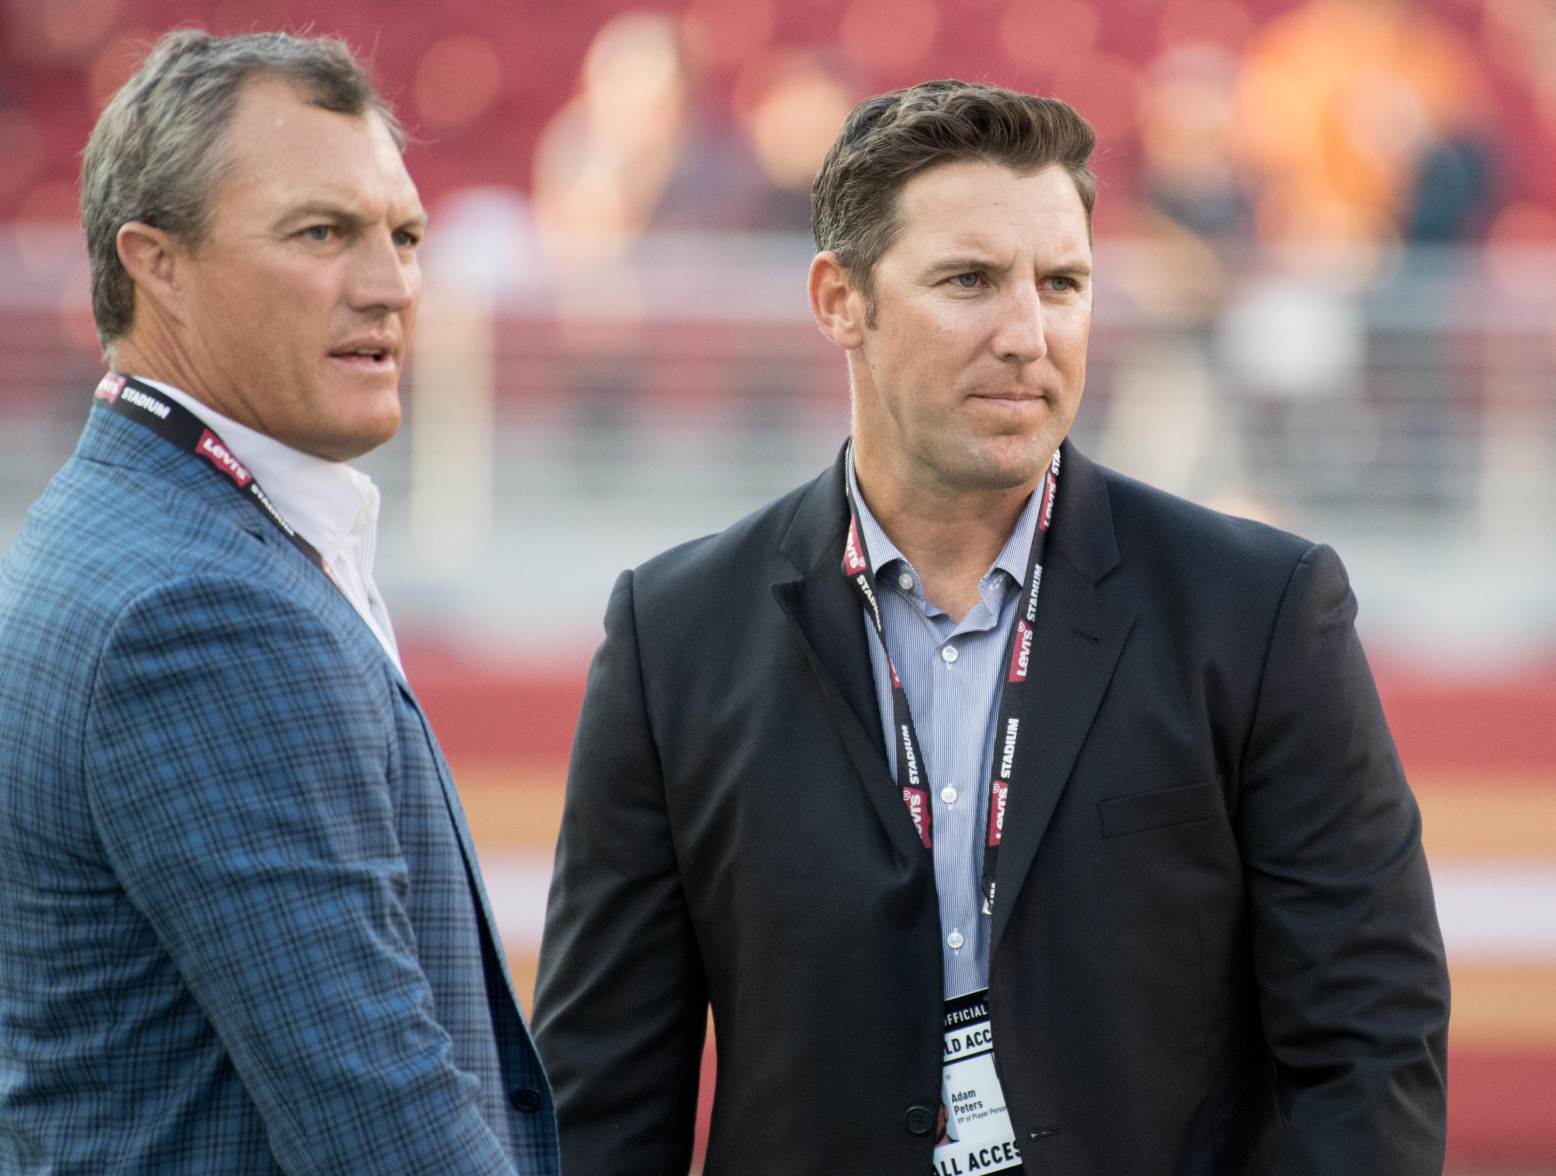 August 19, 2017; Santa Clara, CA, USA; San Francisco 49ers general manager John Lynch (left) and vice president of player personnel Adam Peters (right) before the game against the Denver Broncos at Levi's Stadium. The Broncos defeated the 49ers 33-14. Credit: Kyle Terada-USA TODAY Sports